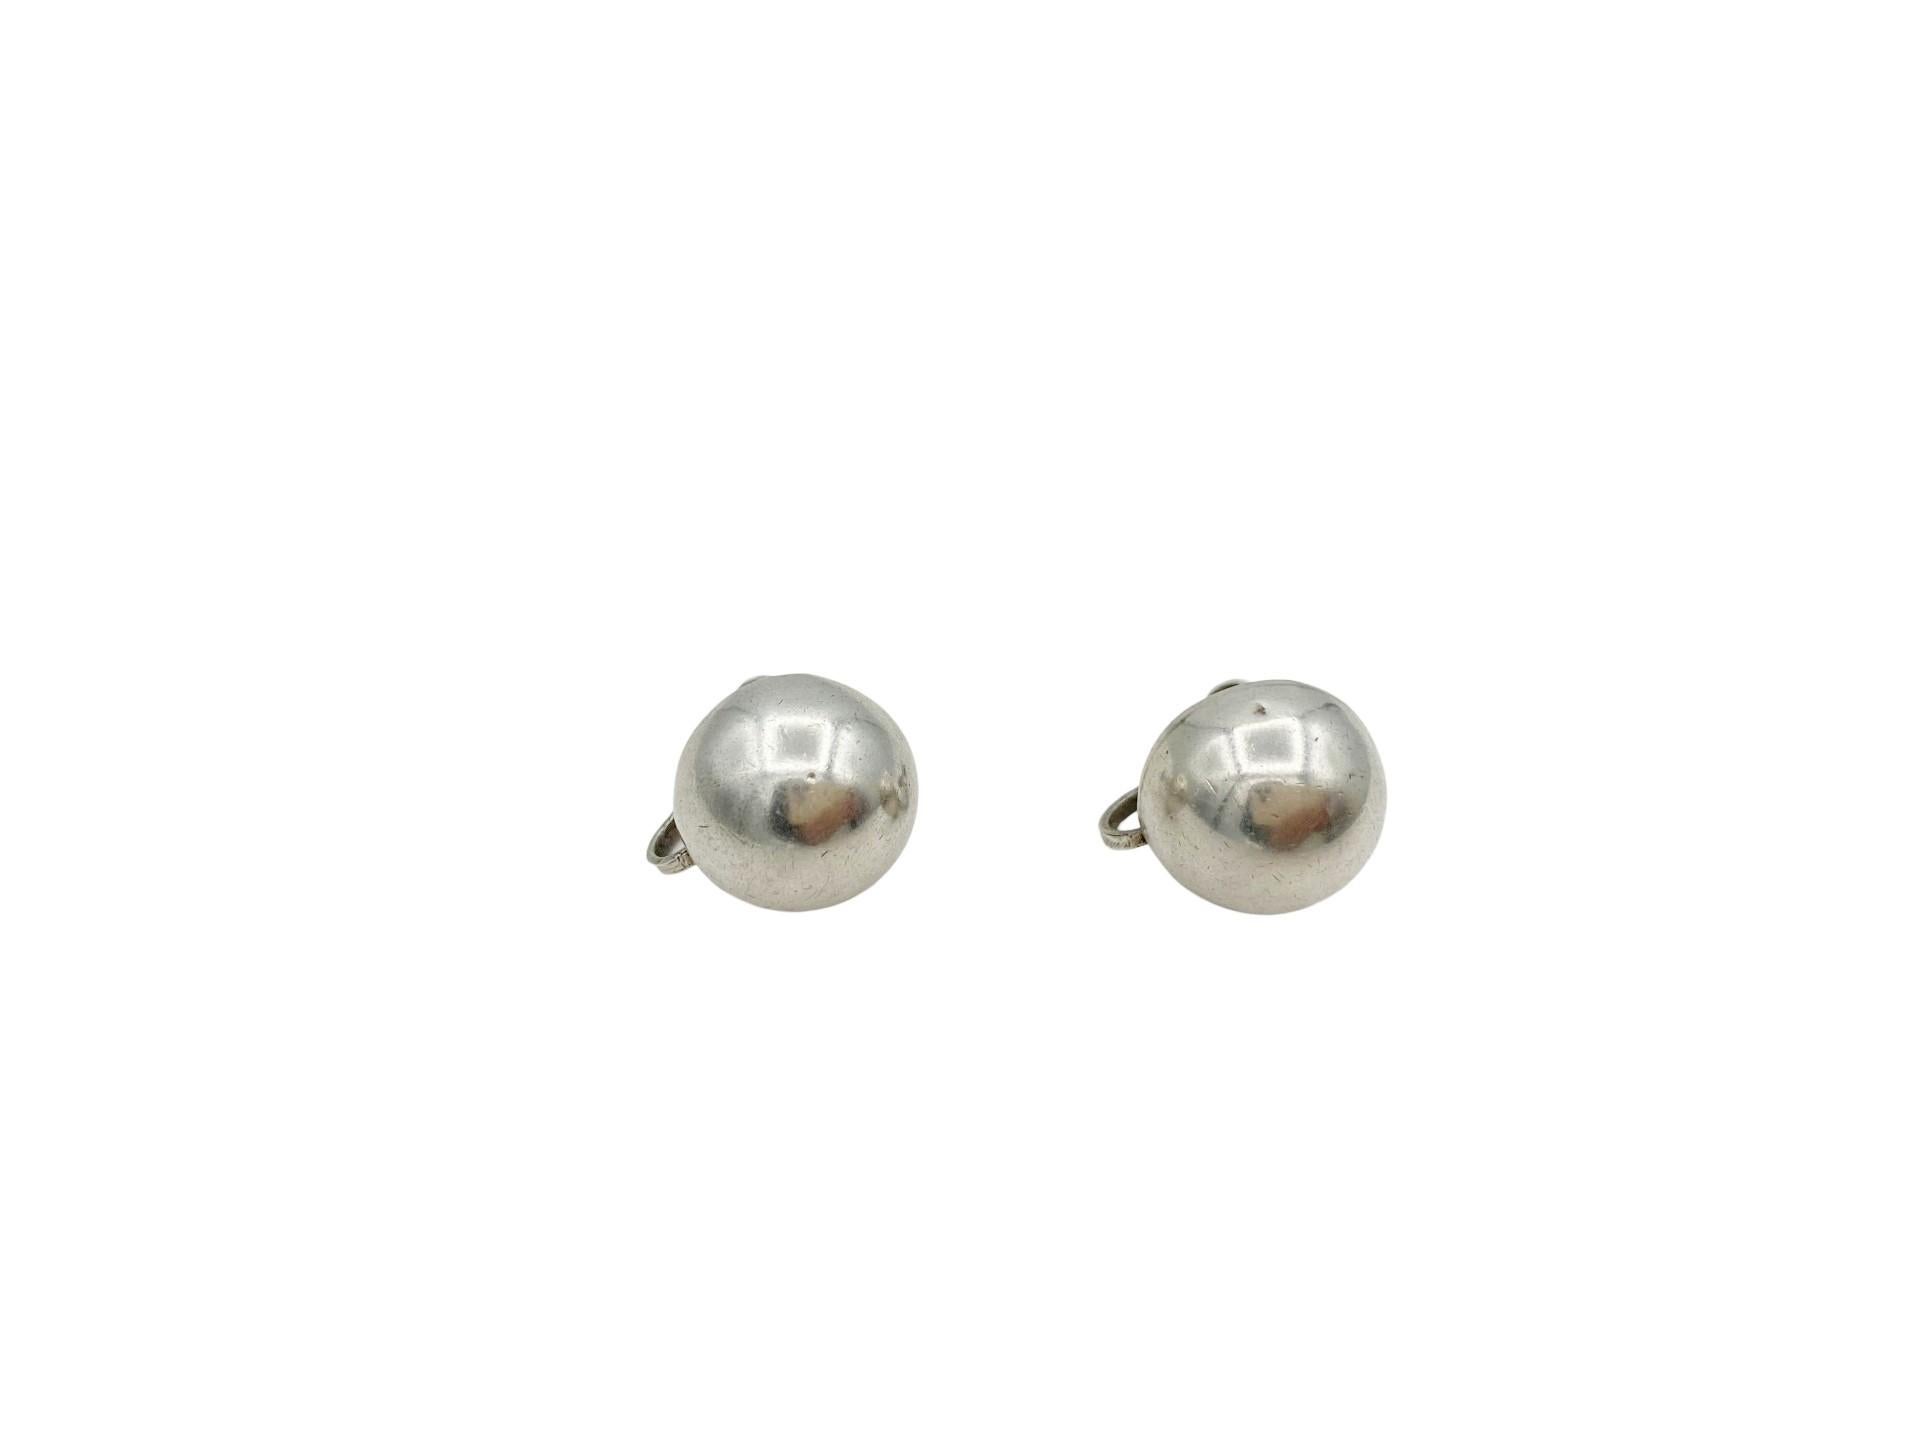 Simple and timeless, these earrings are quite special as, according to Spratling's biography 